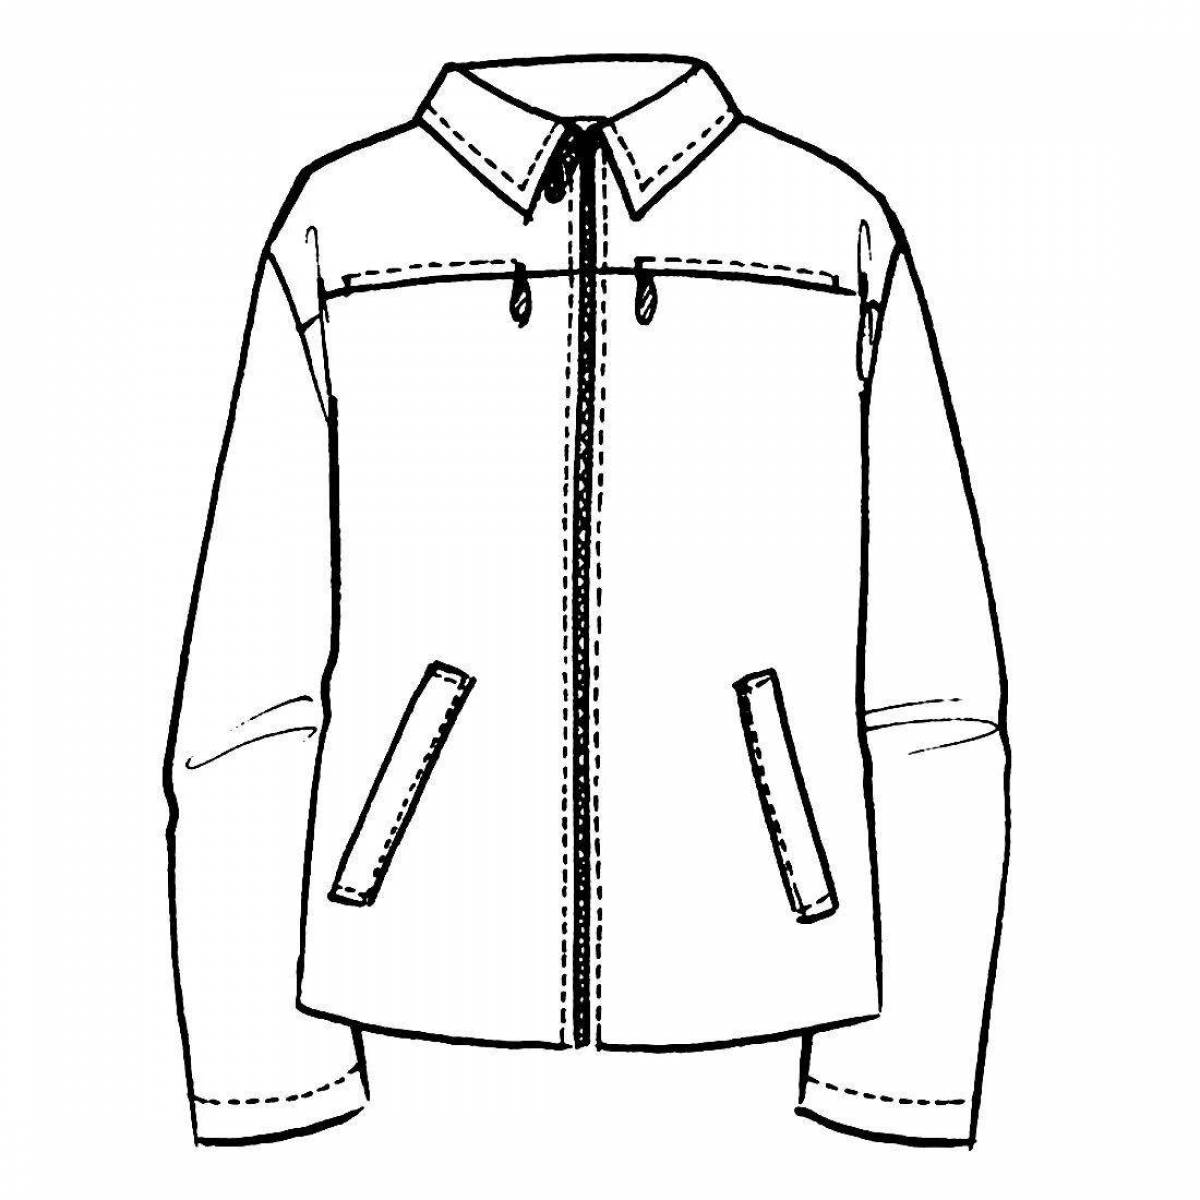 Playful jacket coloring page for kids